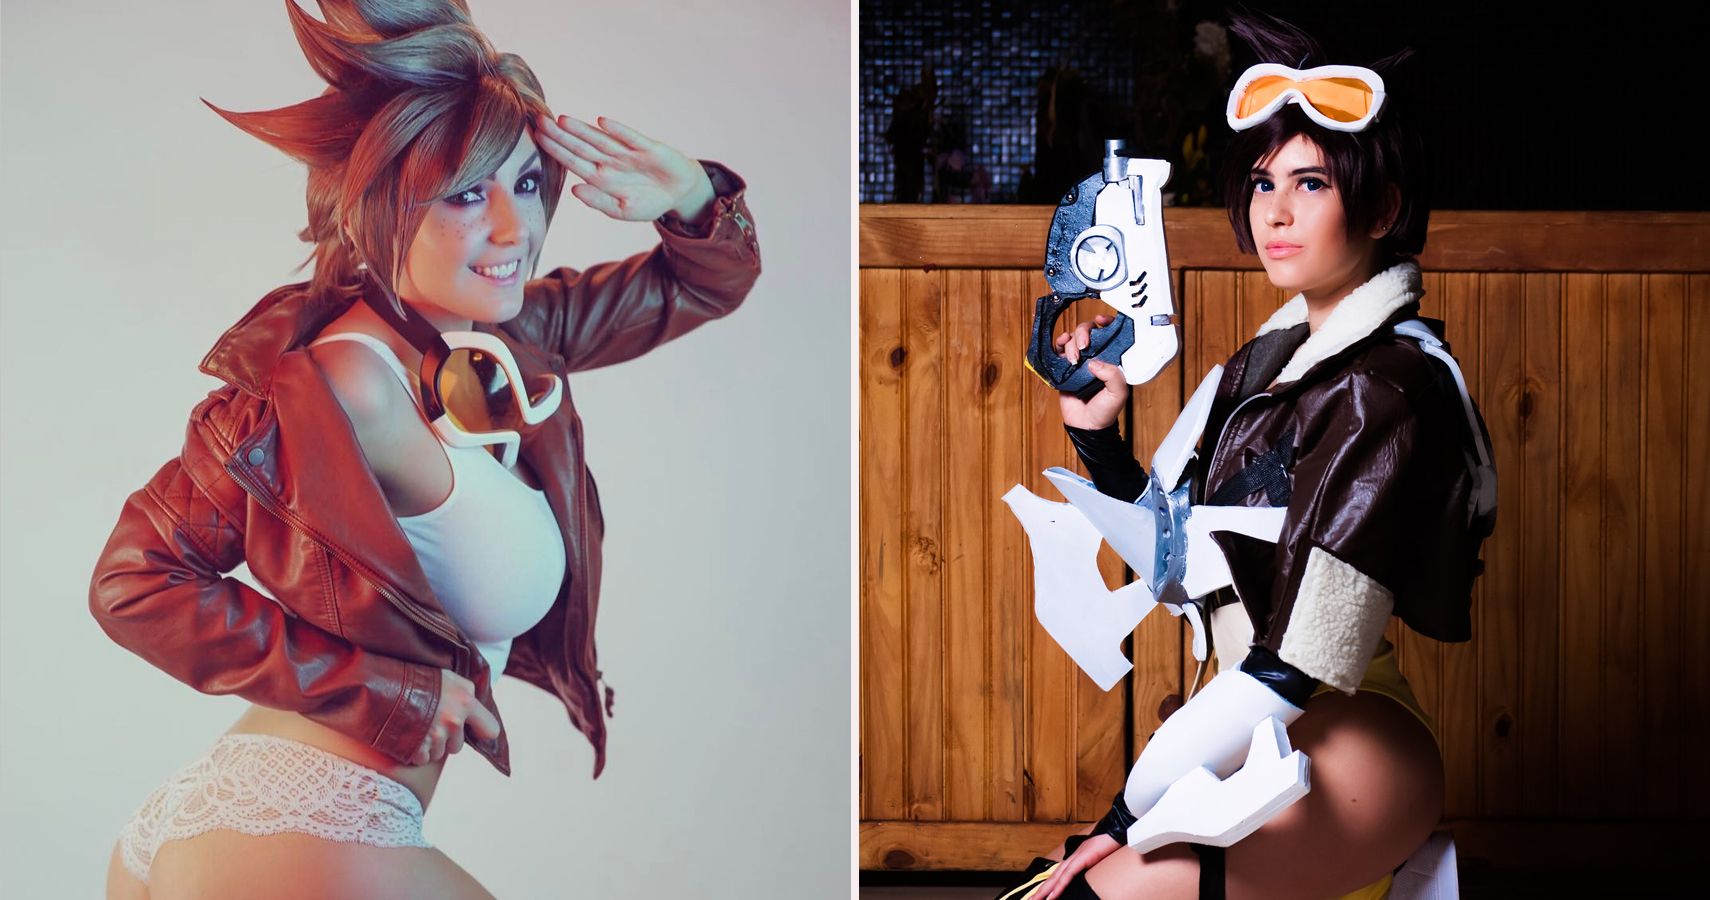 Overwatch The 20 Hottest Tracer Cosplays Thegamer.